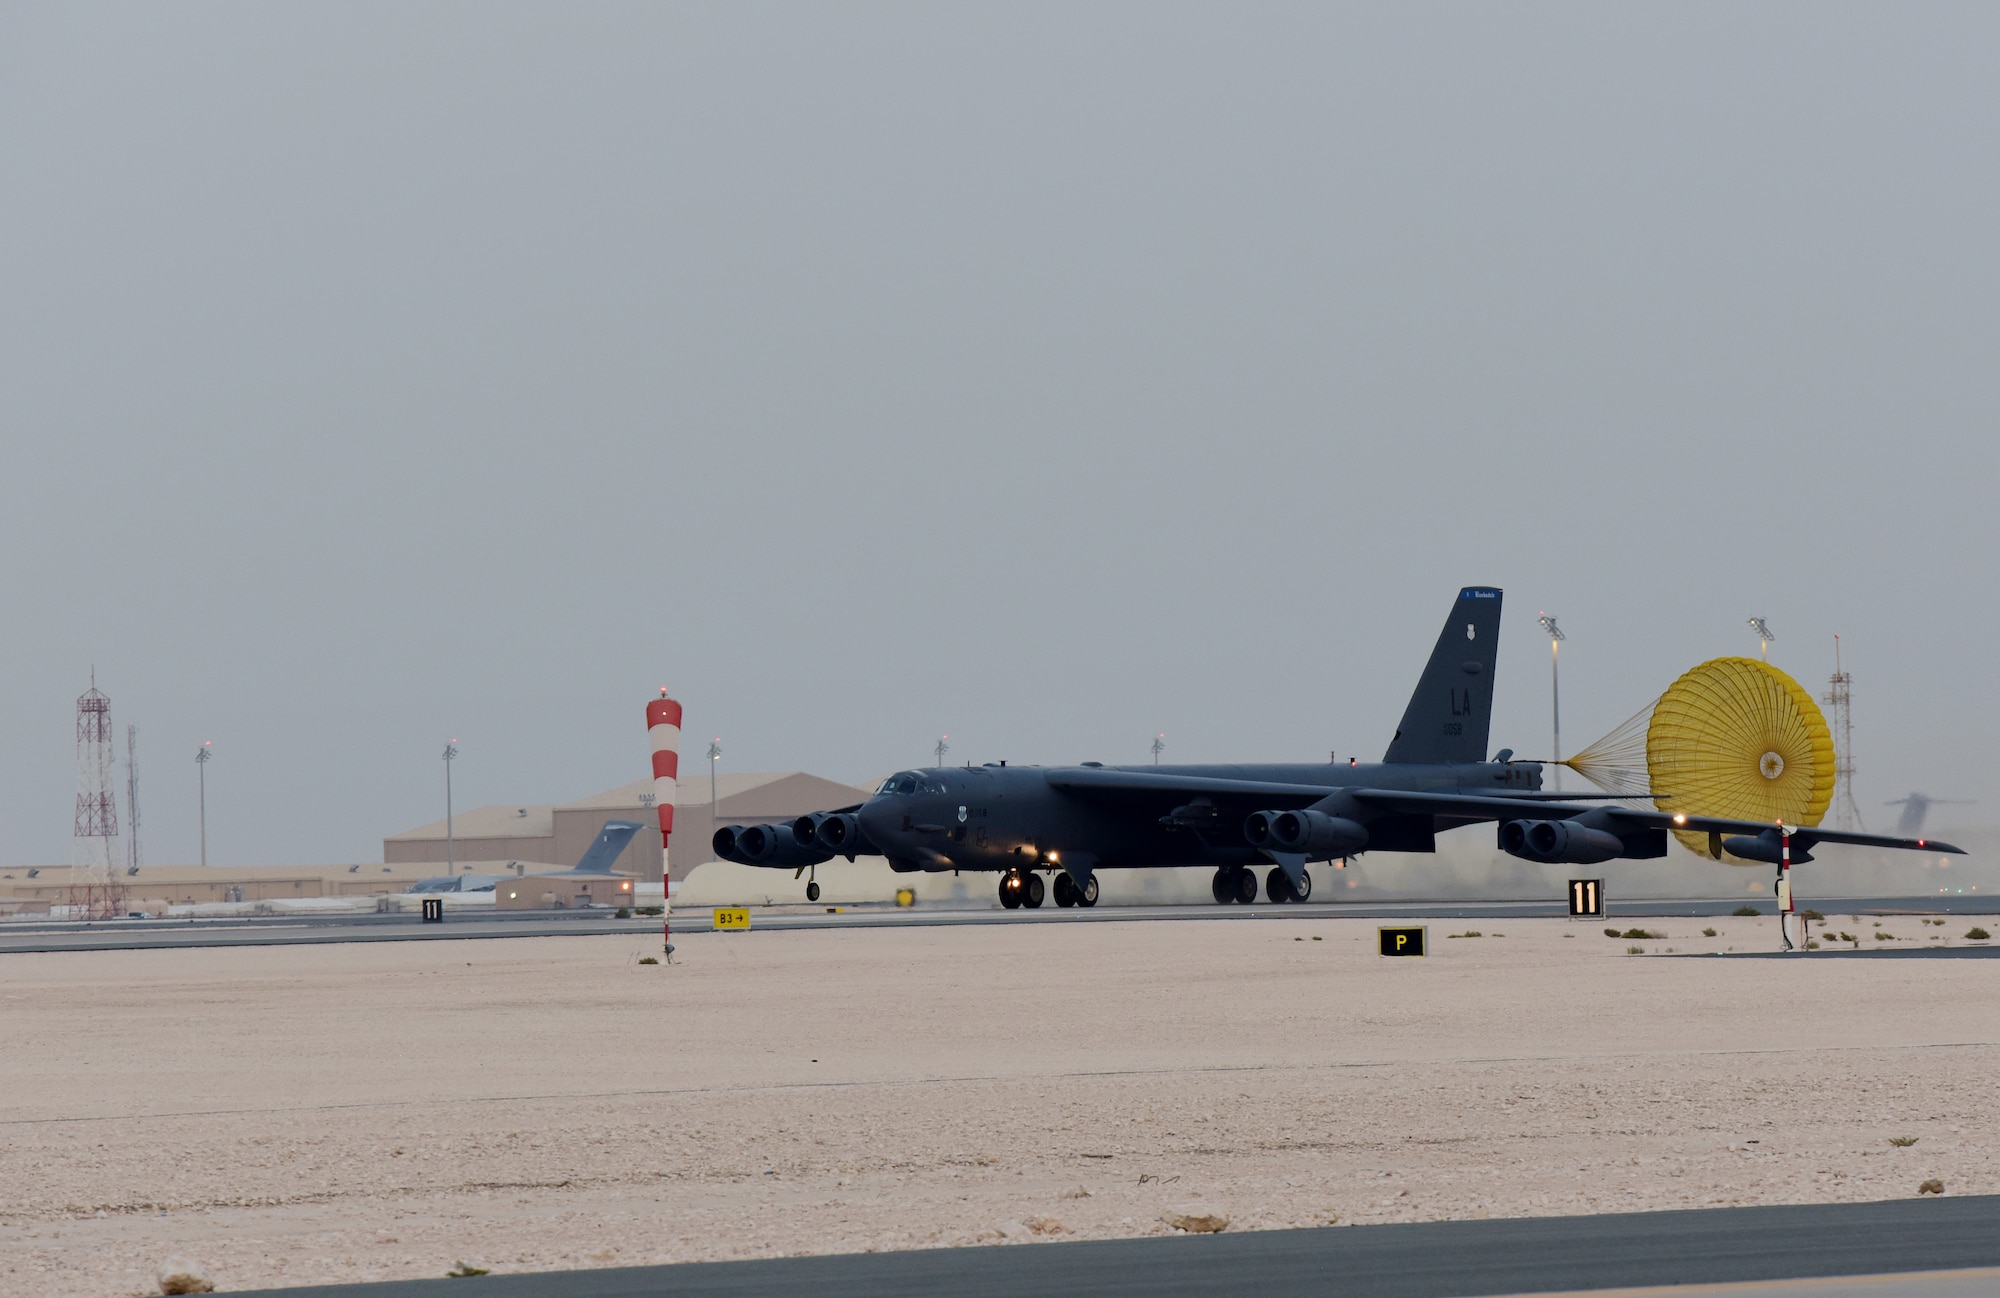 A photo of a B-52 bomber